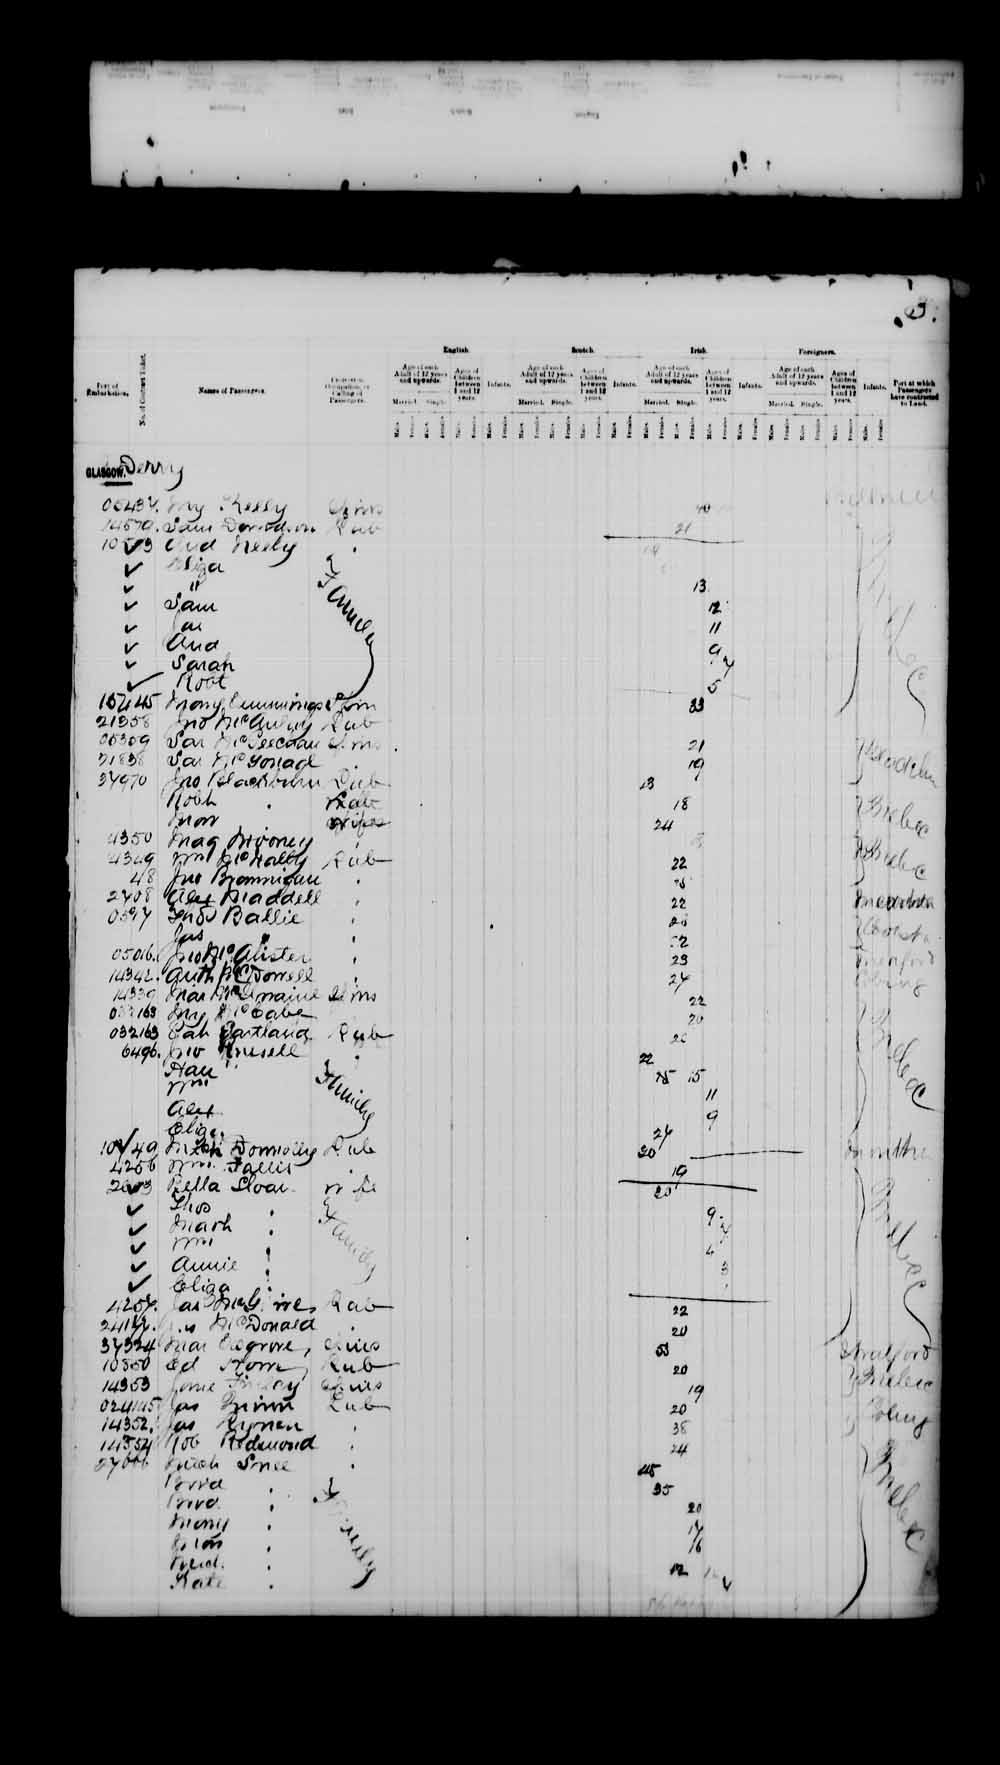 Digitized page of Passenger Lists for Image No.: e003543098